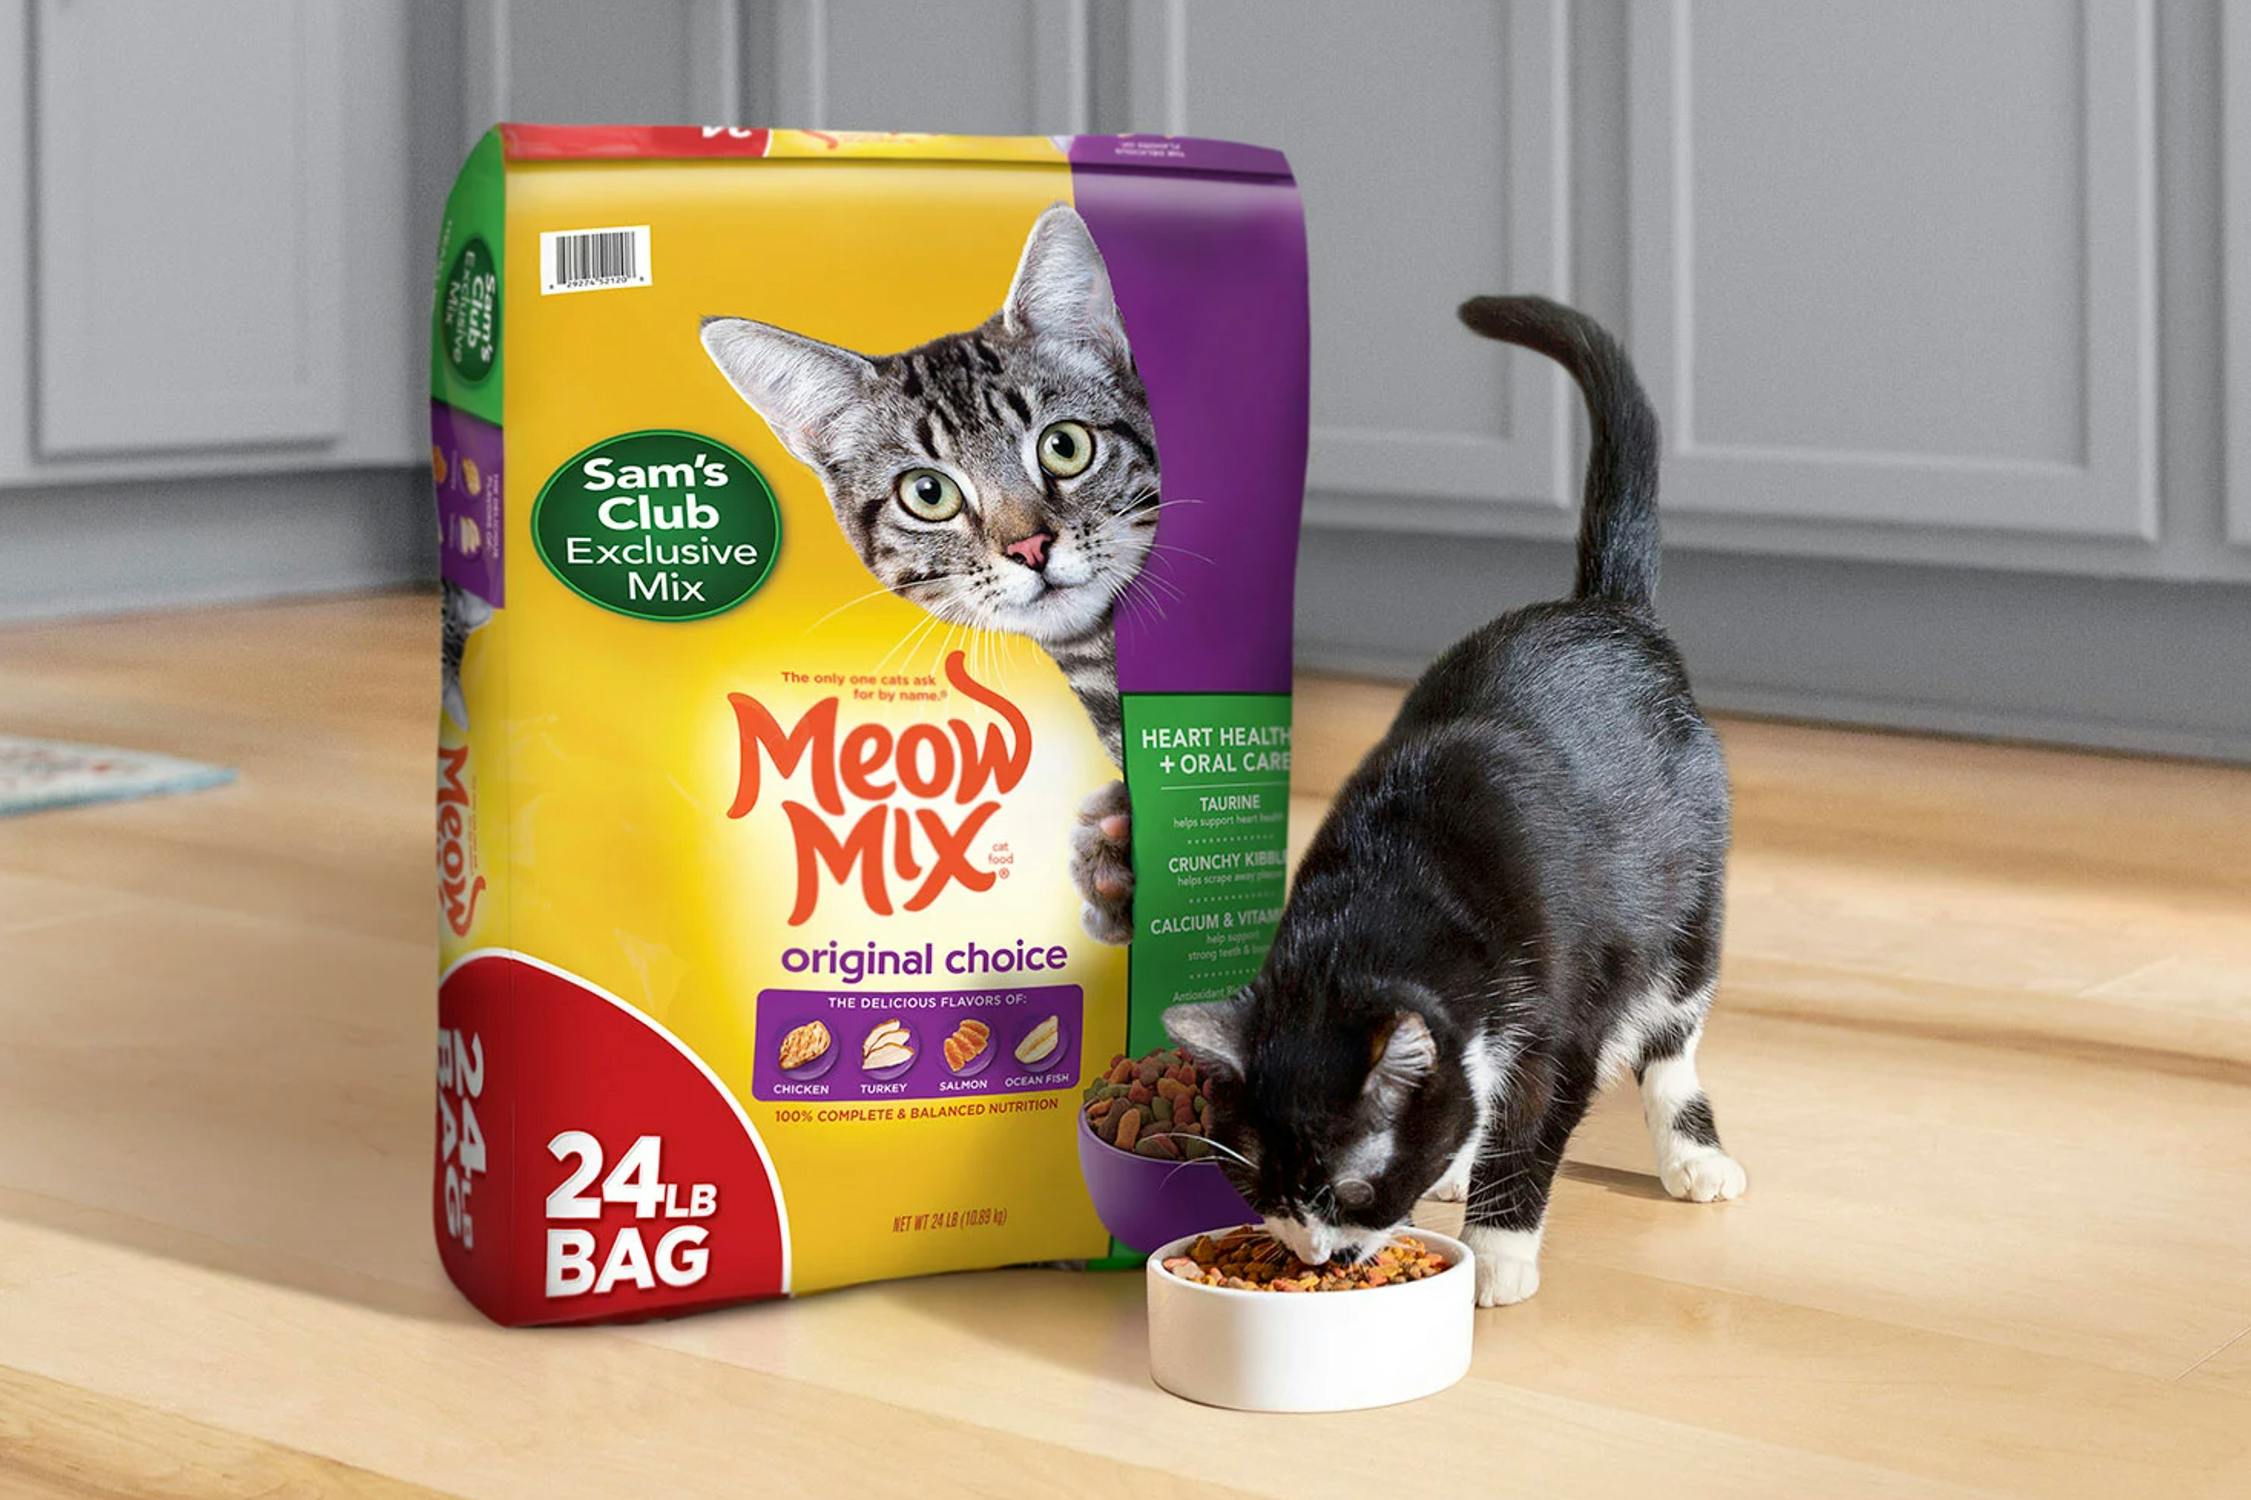 sam's club exclusive mixture meow mix food near a cat eating from a bowl